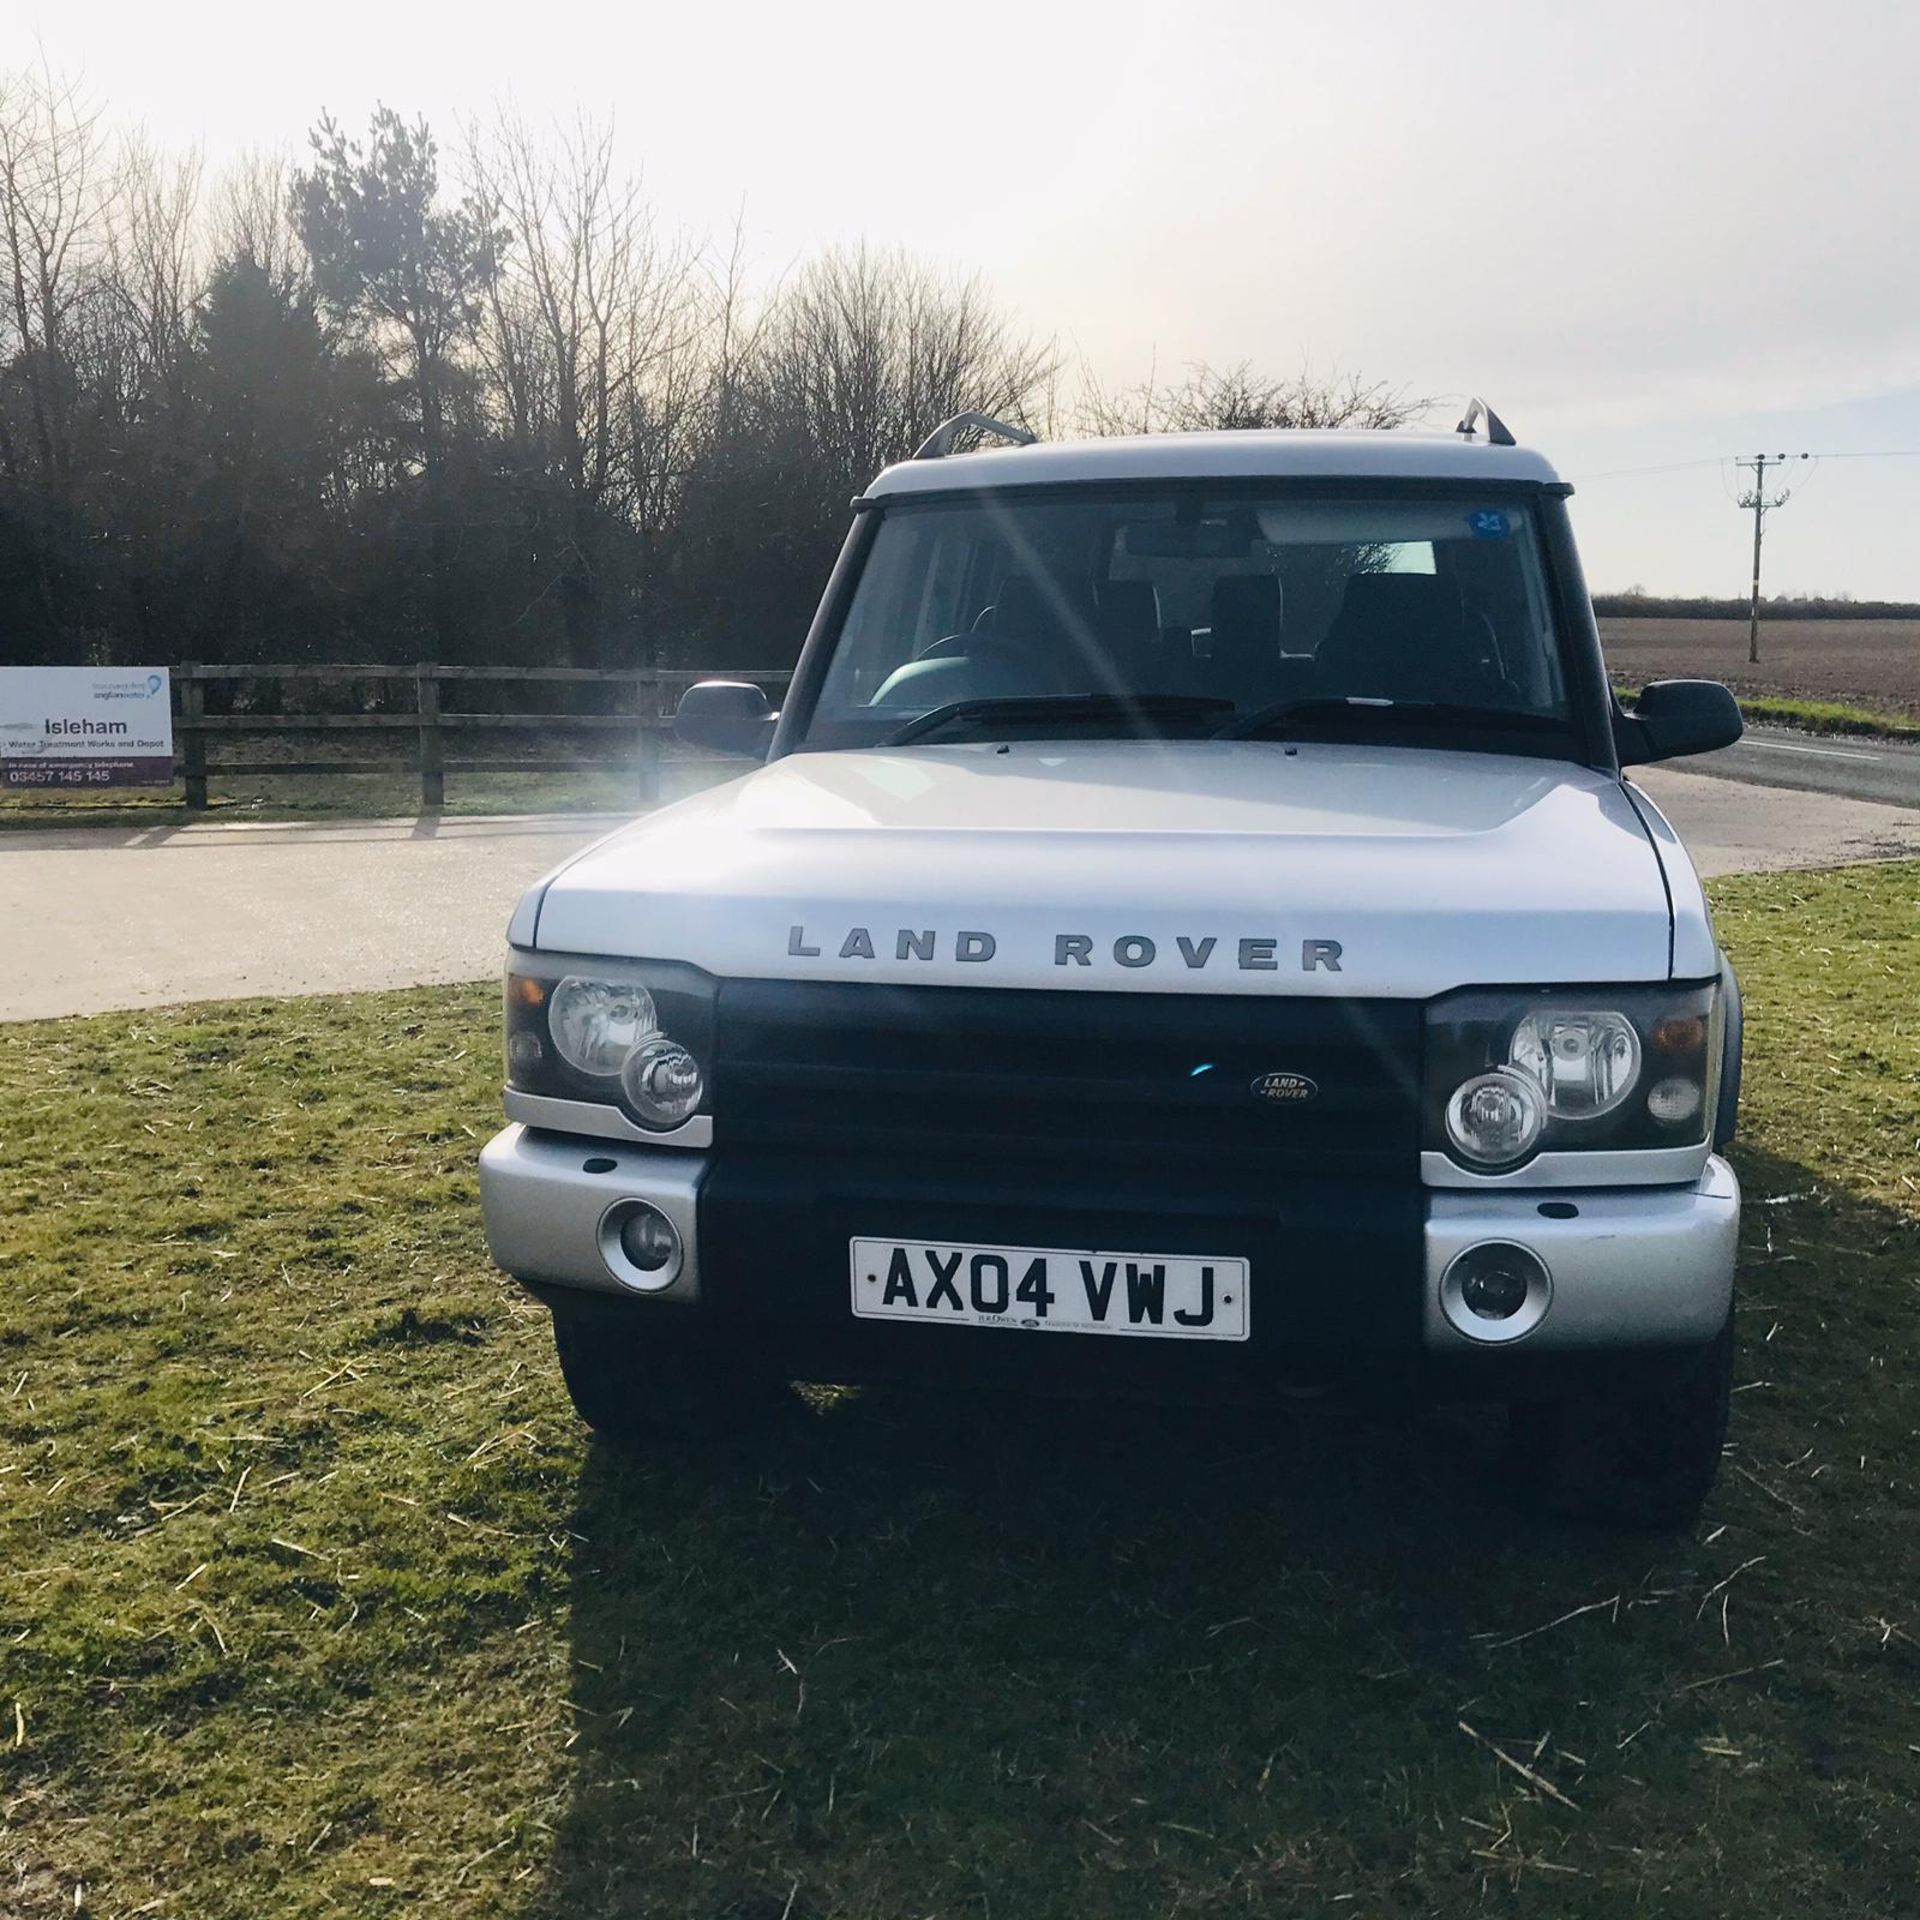 (RESERVE MET) Land Rover Discovery Pursuit 2.5 Td5 - 2004 04 Reg - 7 Seater - Air con - Tow Bar - Image 5 of 17